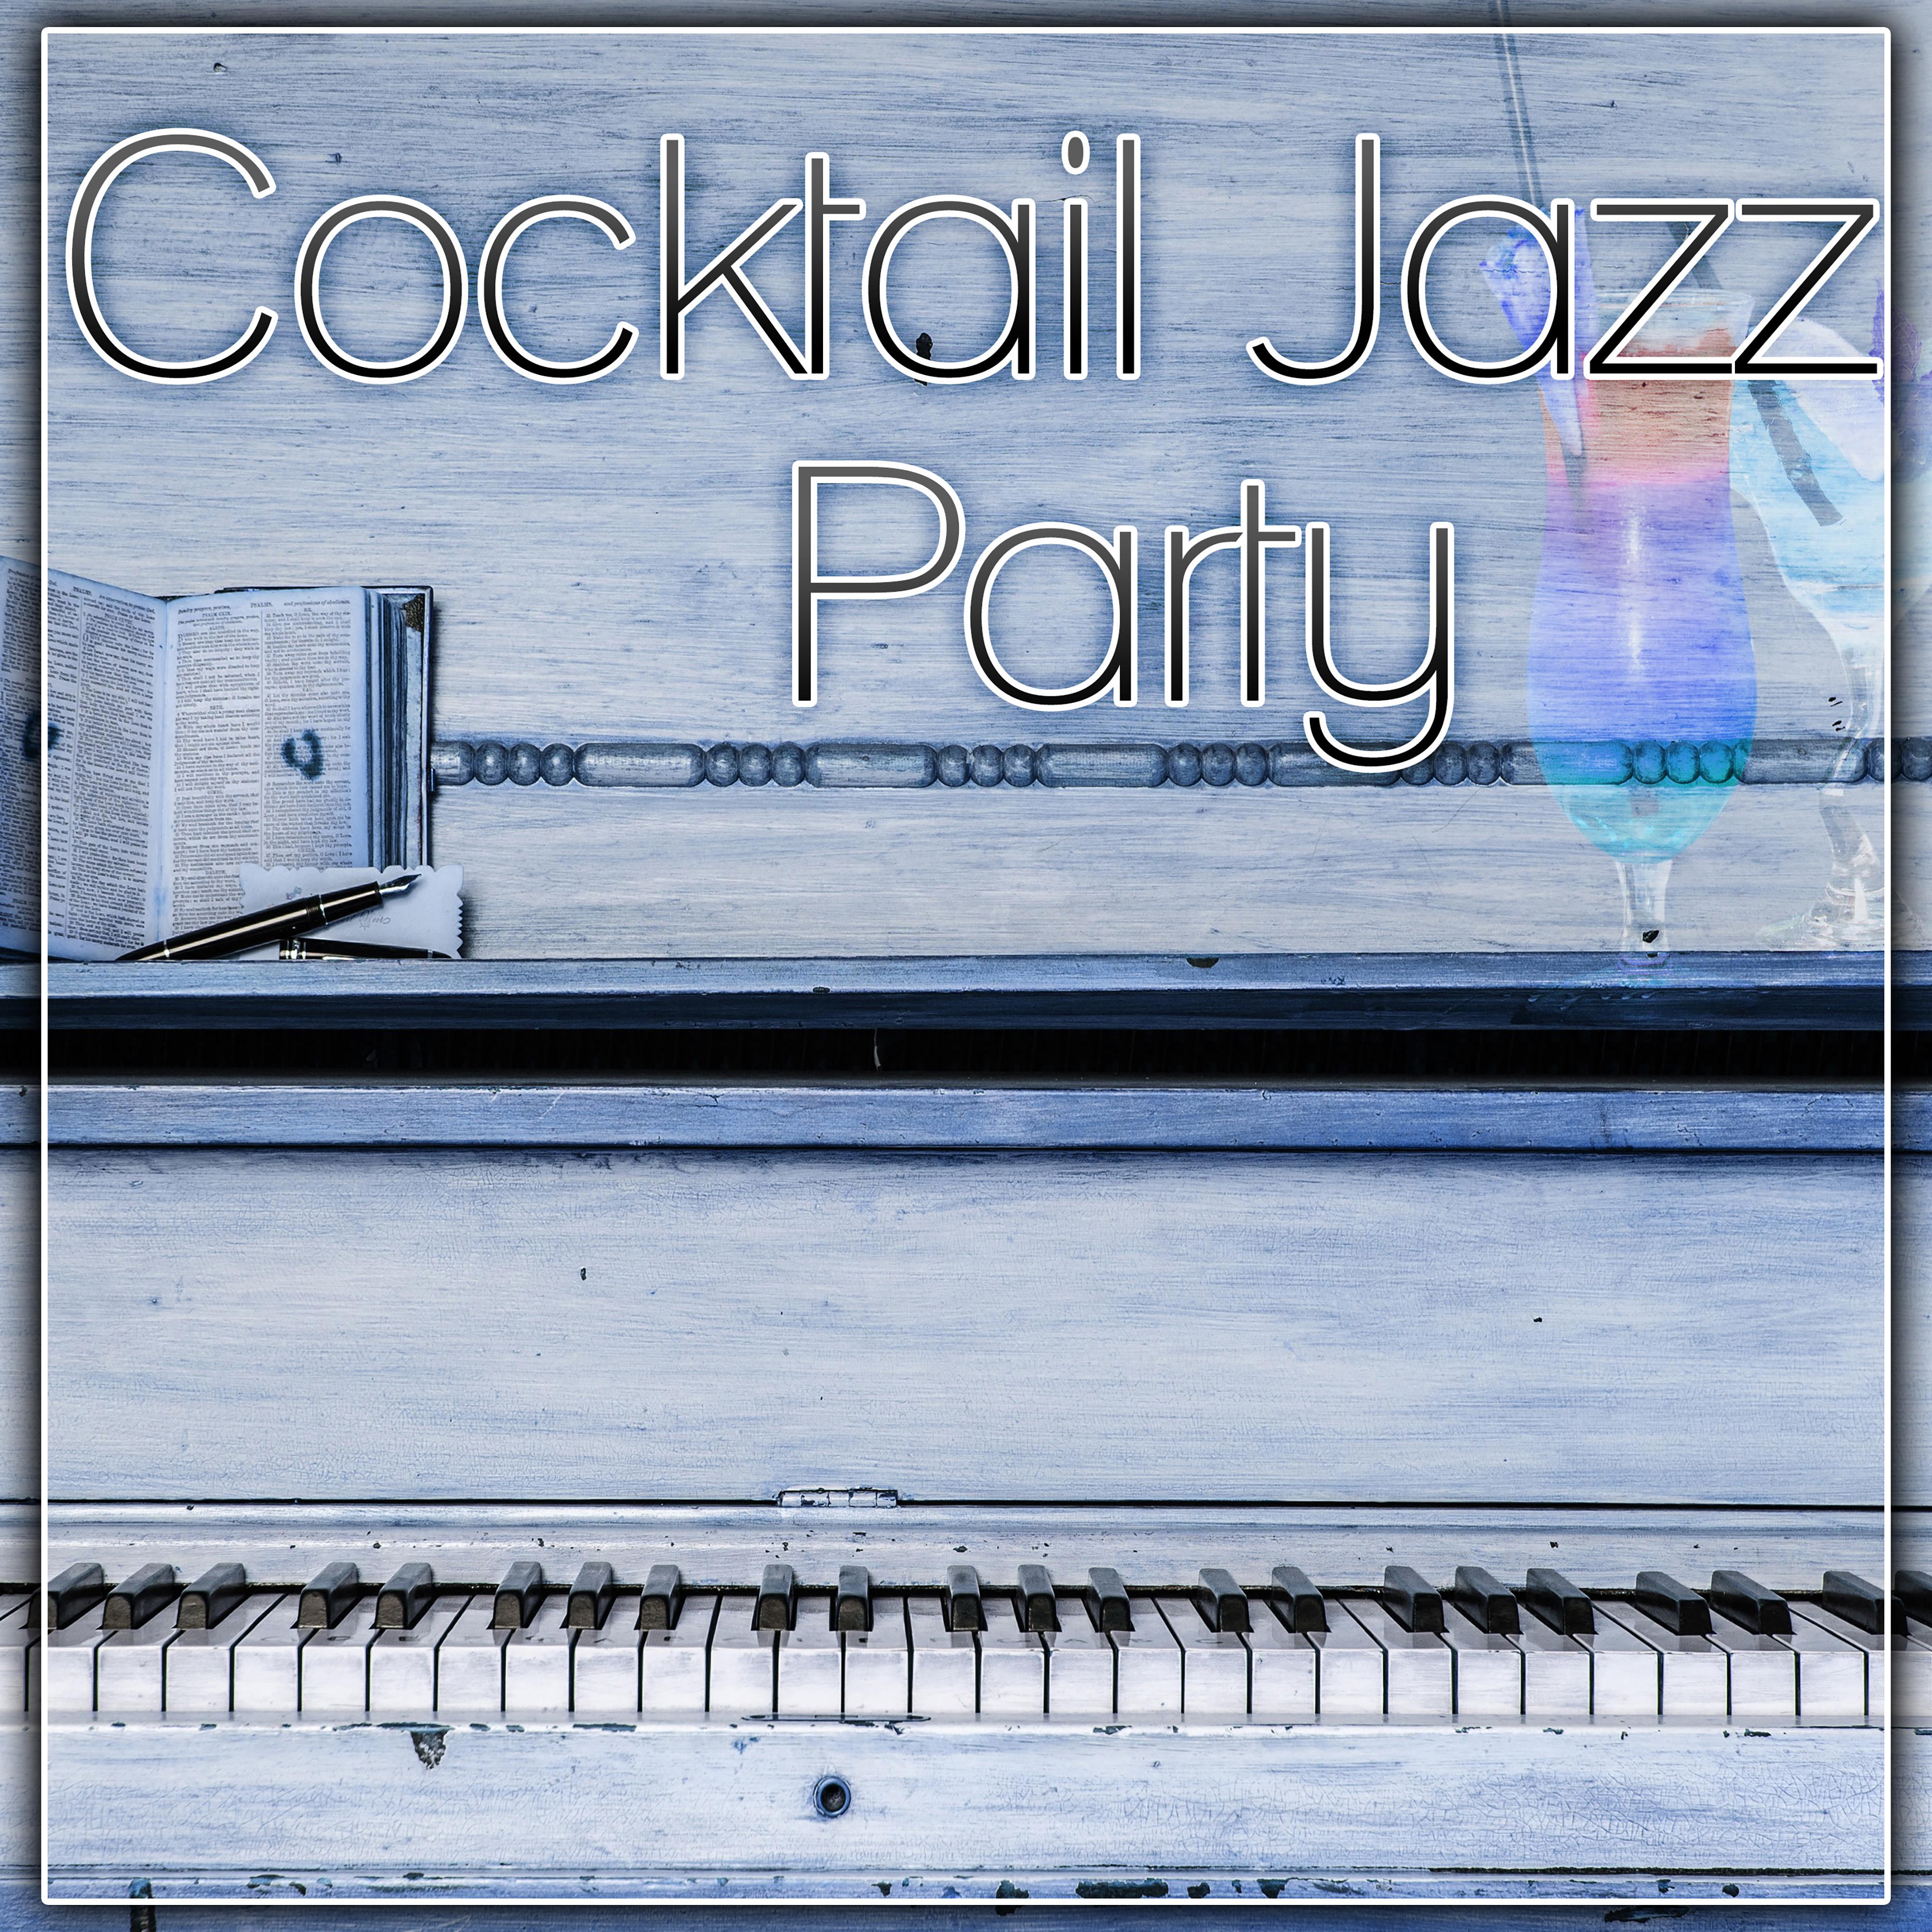 Cocktail Jazz Party – Coffee Time, Party With Jazz Music, Soothing Jazz, Ambient Piano Jazz